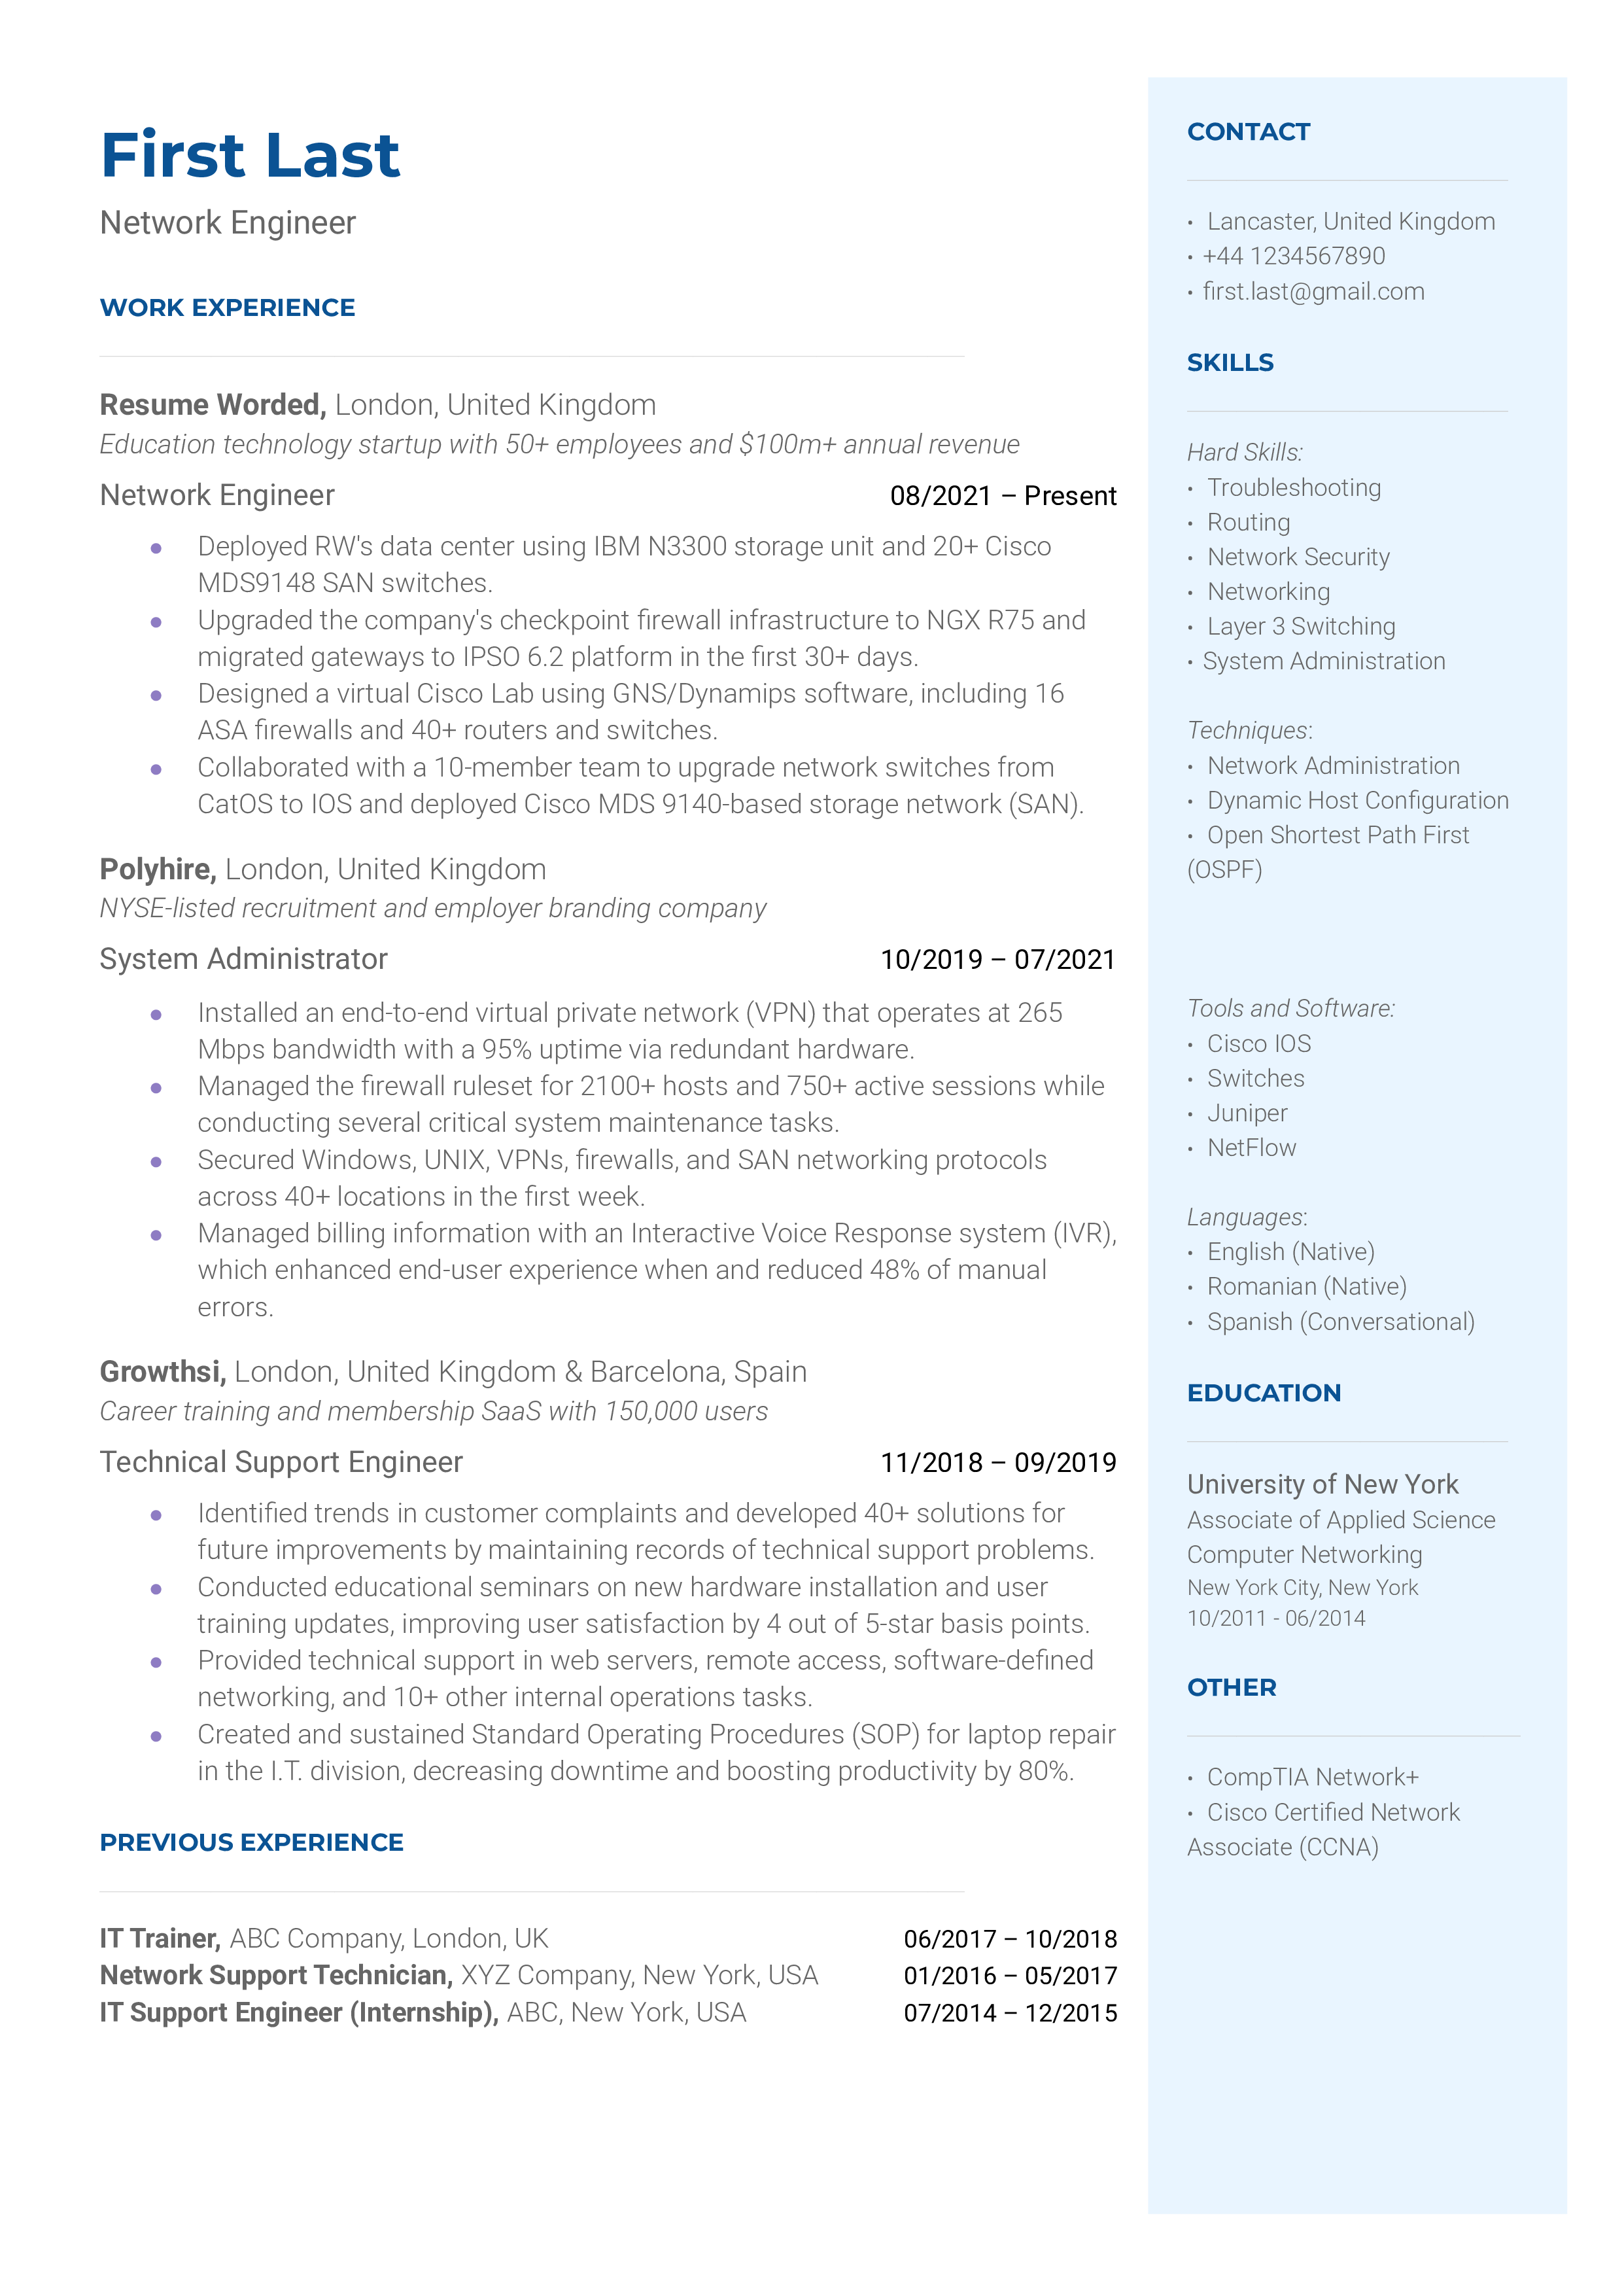 A CV screenshot focused on network engineering skills, certifications, and practical experiences.